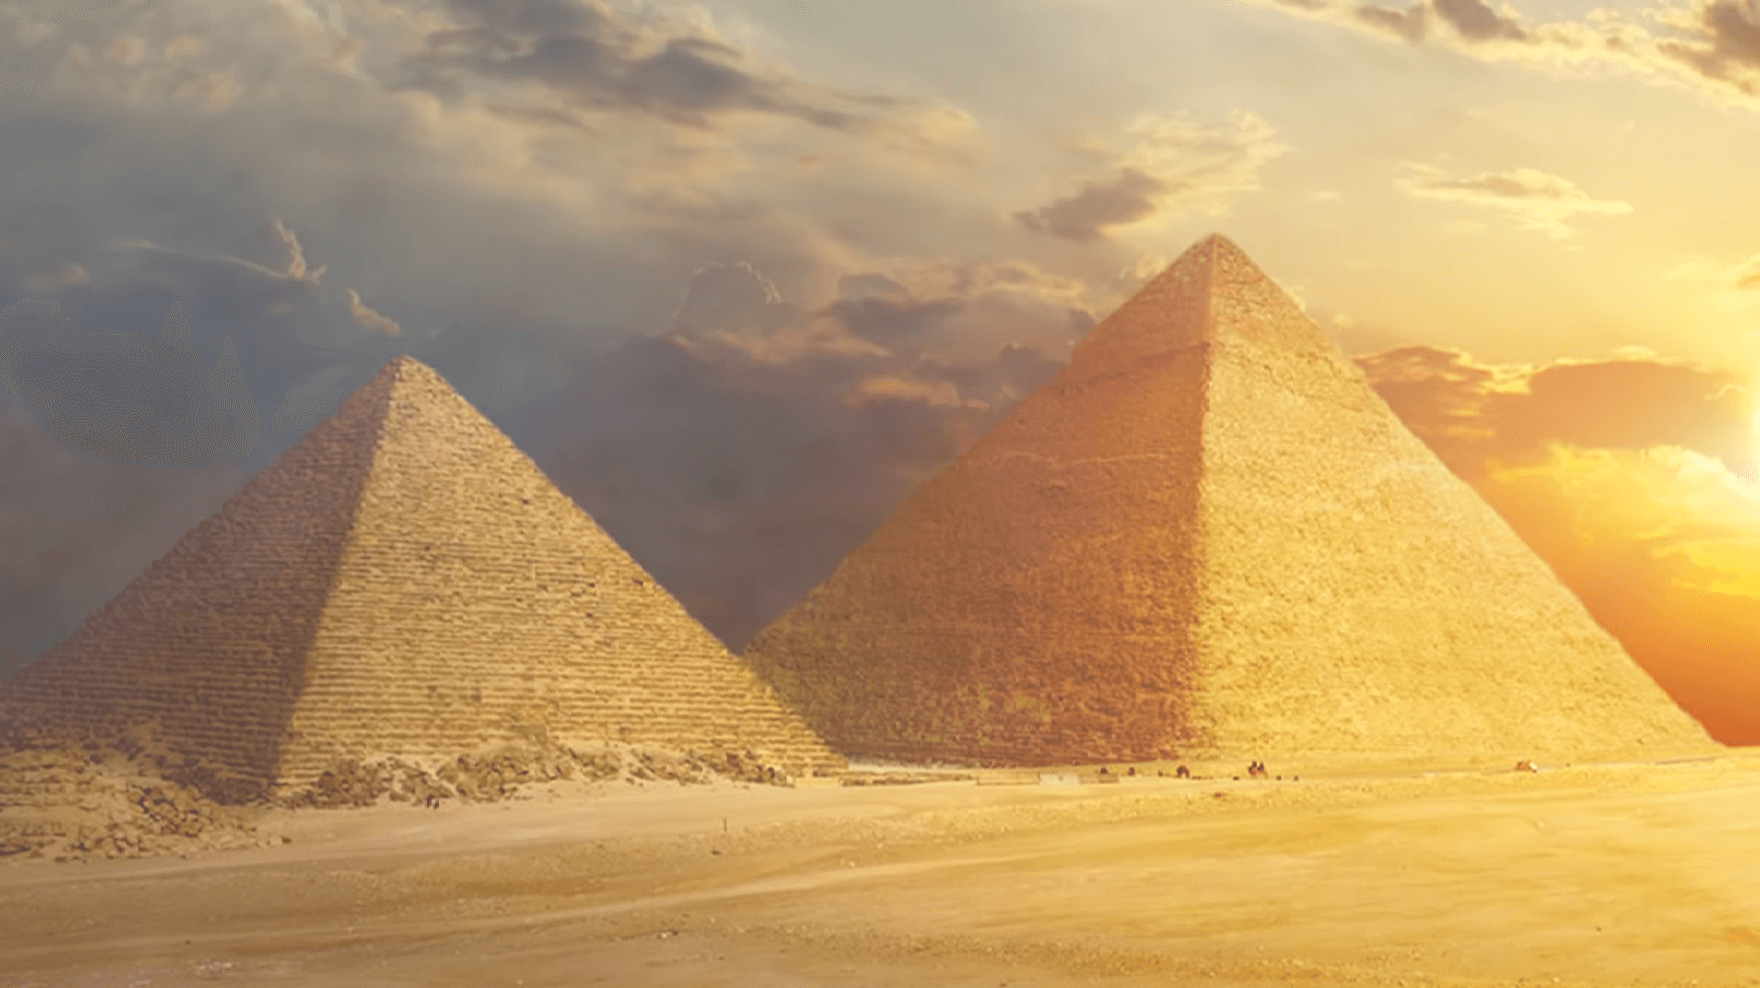 the ancient pyramids